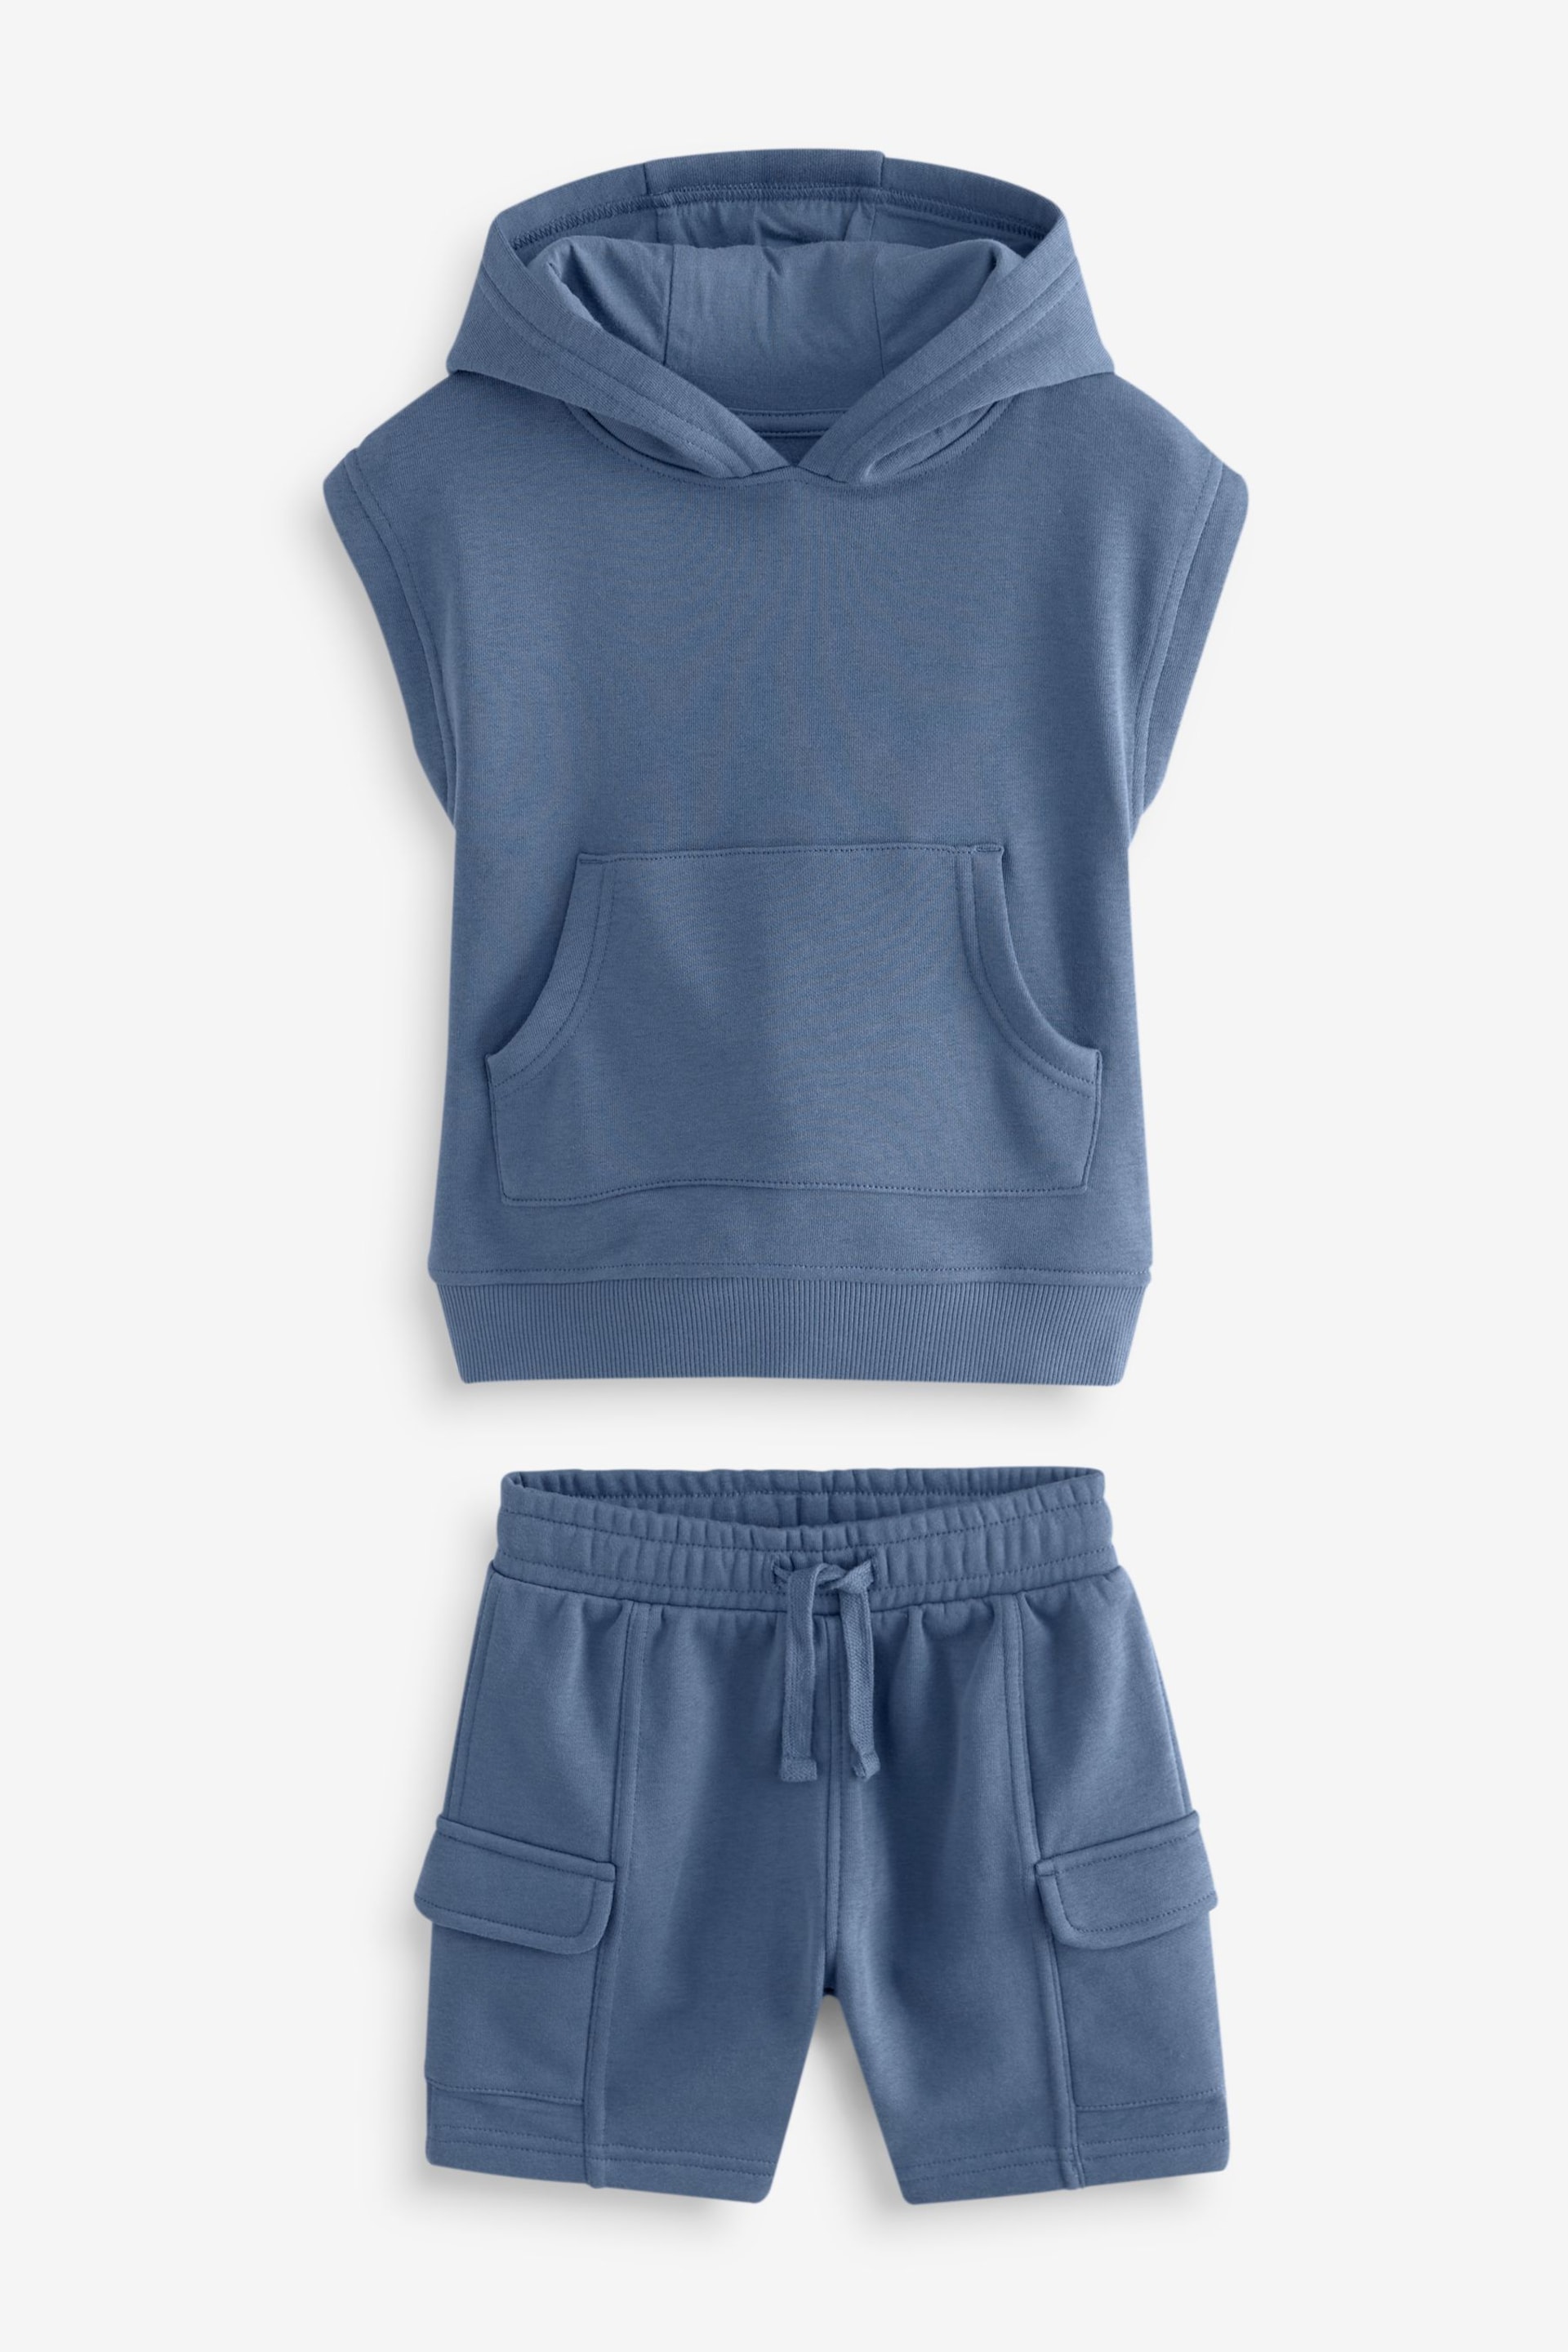 Navy Short Sleeve Utility Hoodie and Shorts Set (3mths-7yrs) - Image 7 of 9